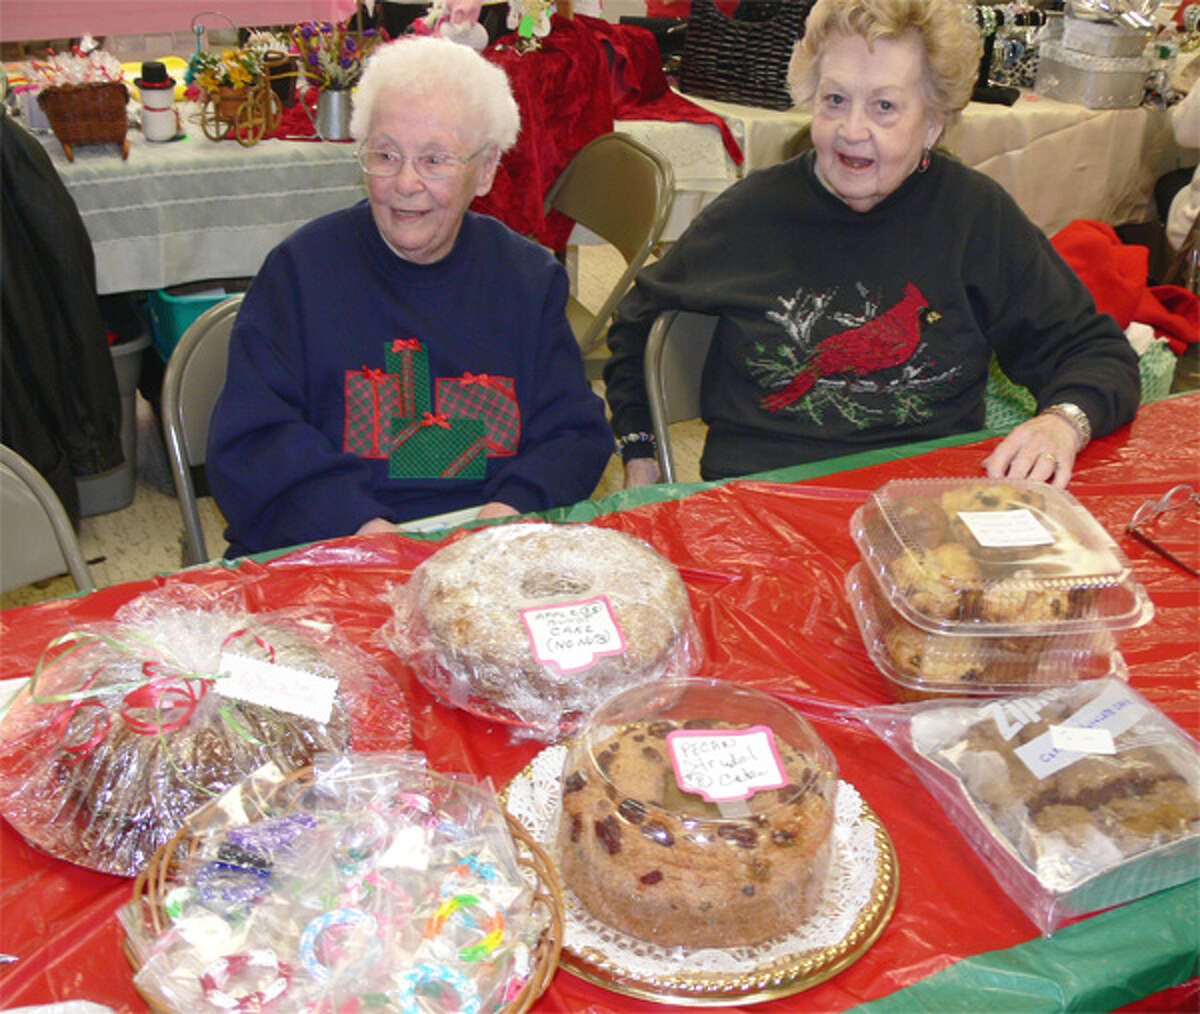 Offering a variety of freshly based goods made by St. Margaret Mary Church members are Loretta Harris, left, and Marjorie Chulak.